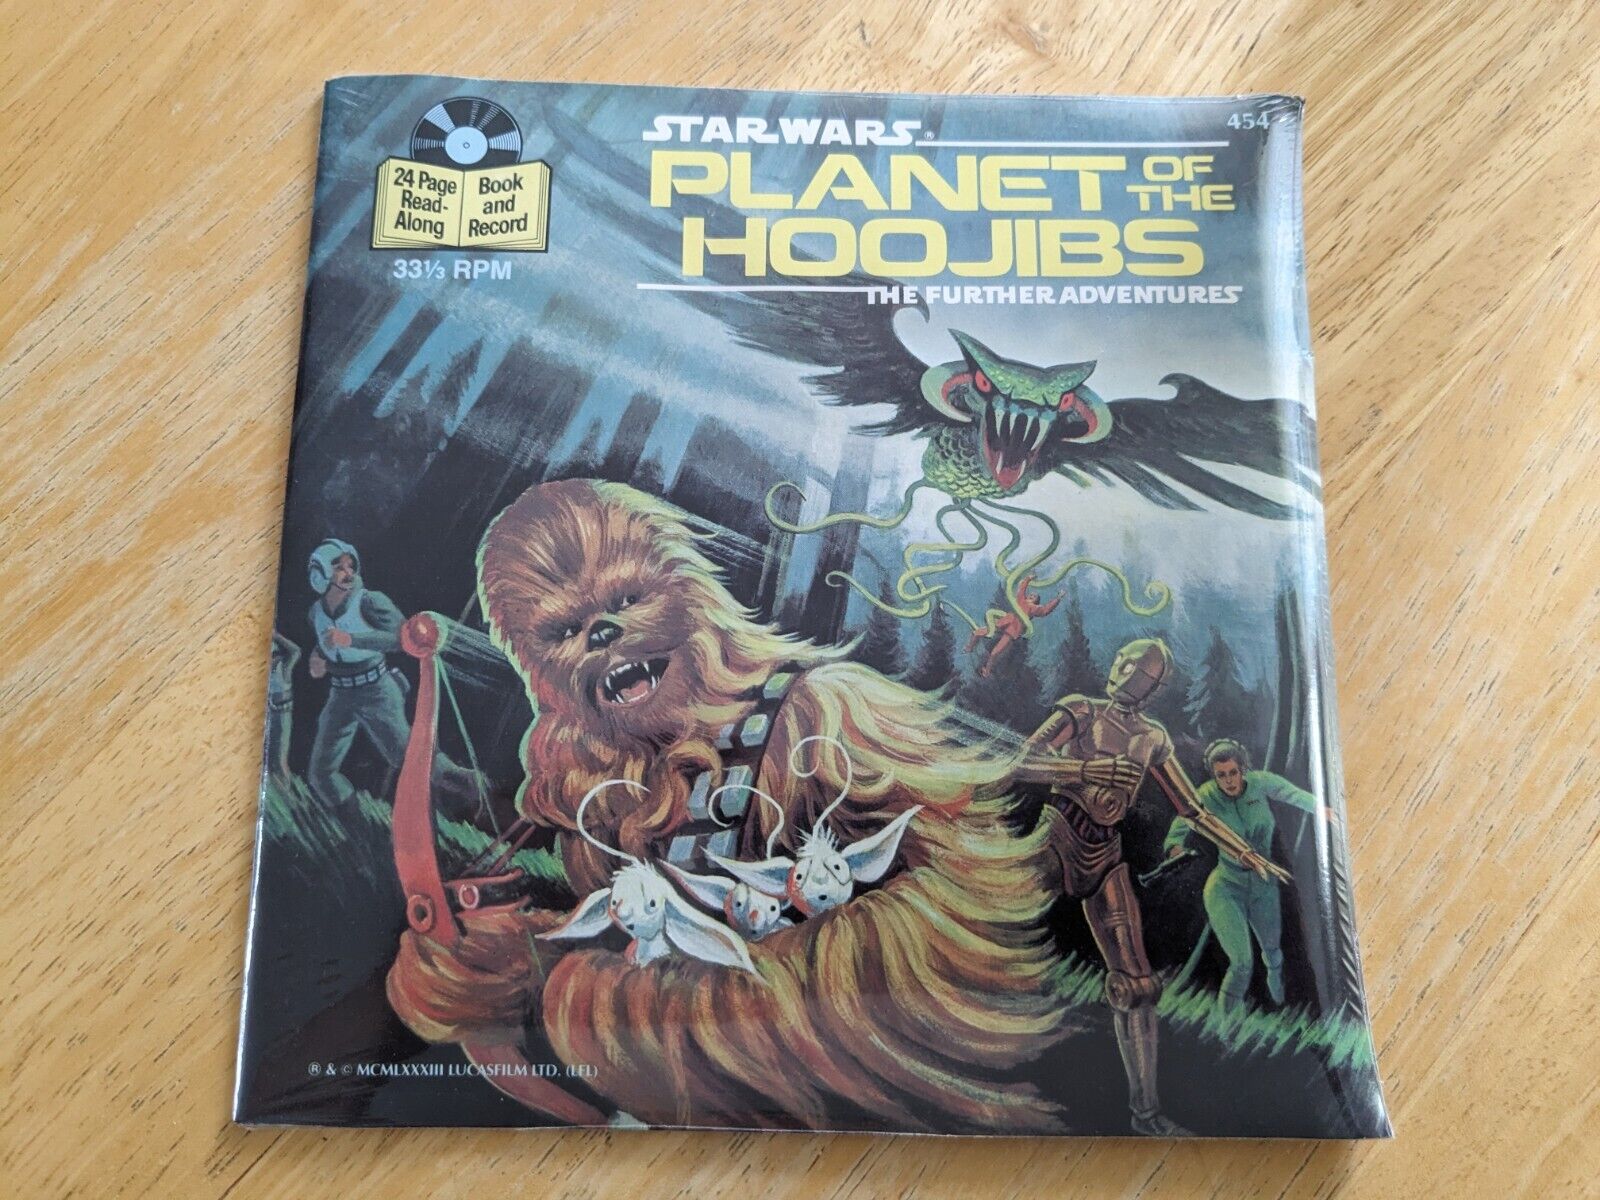 1983 Star Wars Planet of the Hoojibs Book Record Set Read Along Sealed